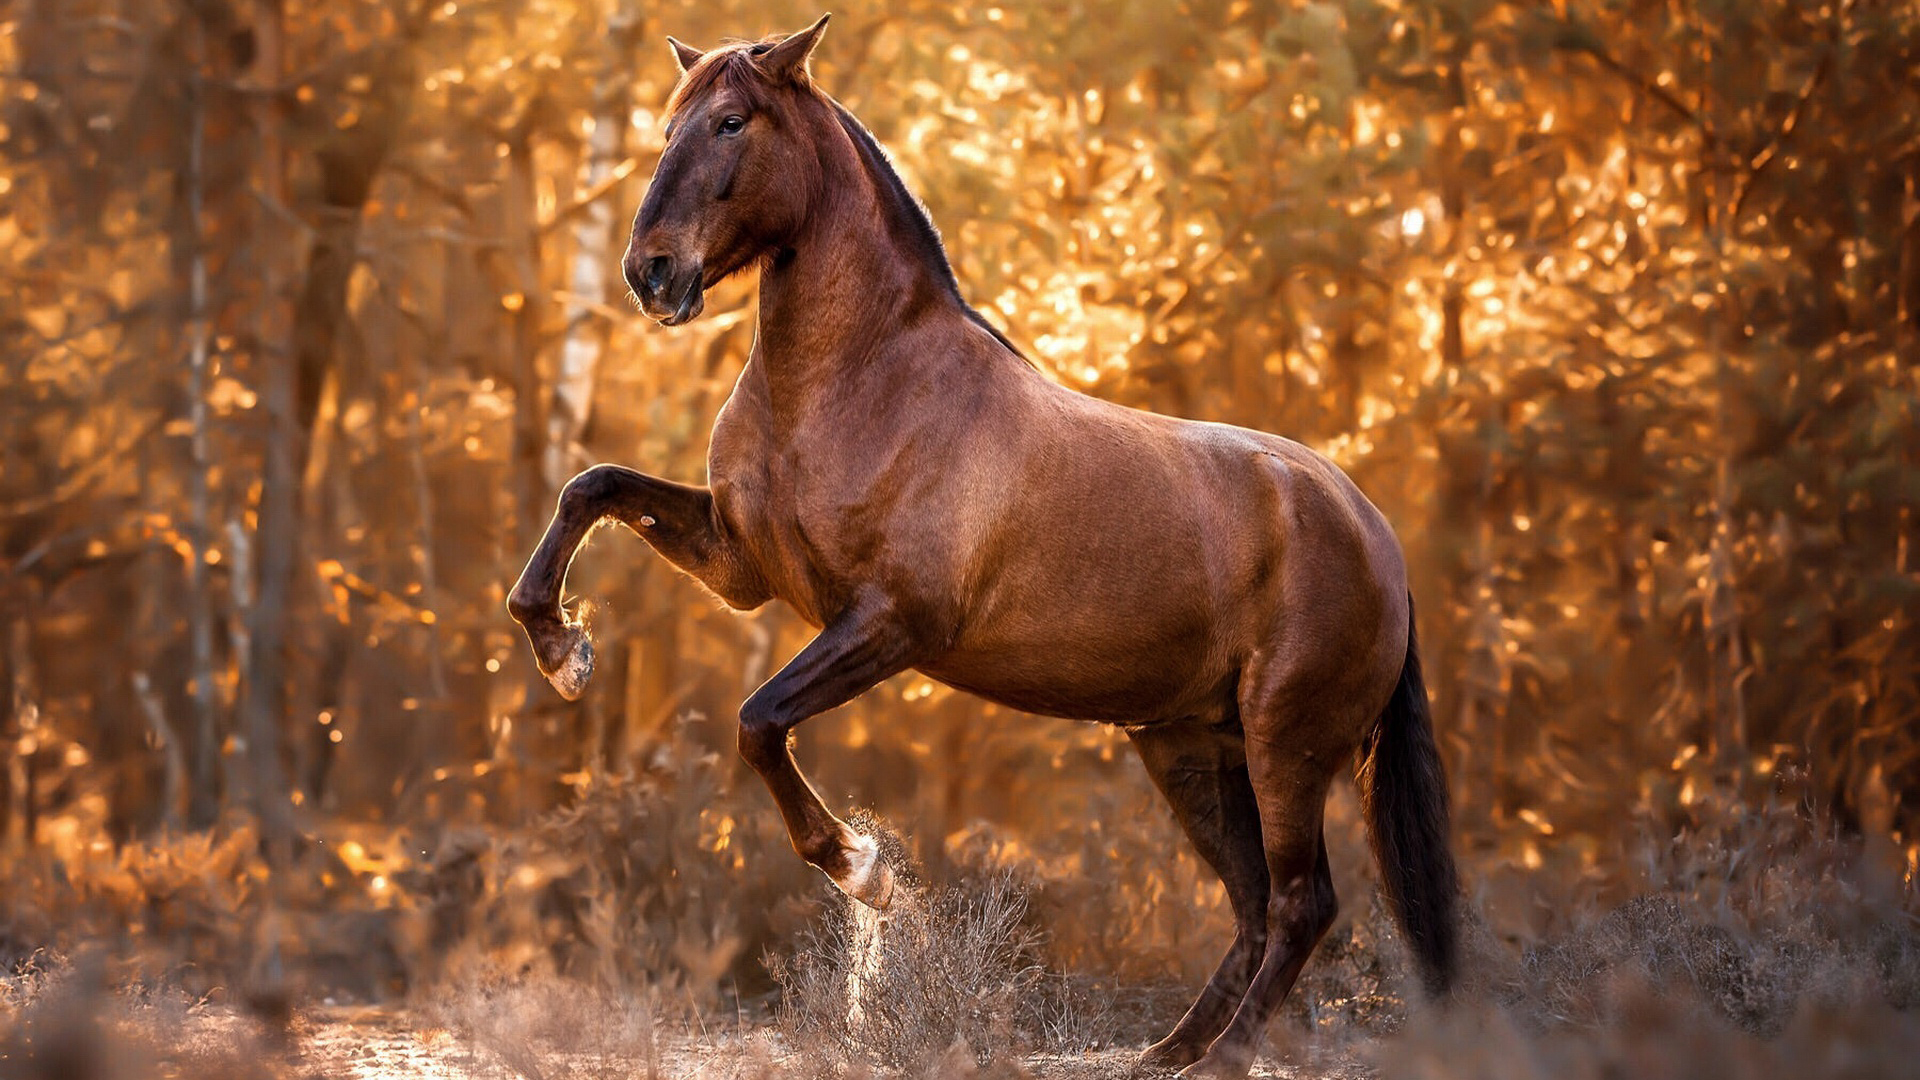 Brown Horse Is Standing On Two Legs On Water In Forest Wallpaper 2K Horse